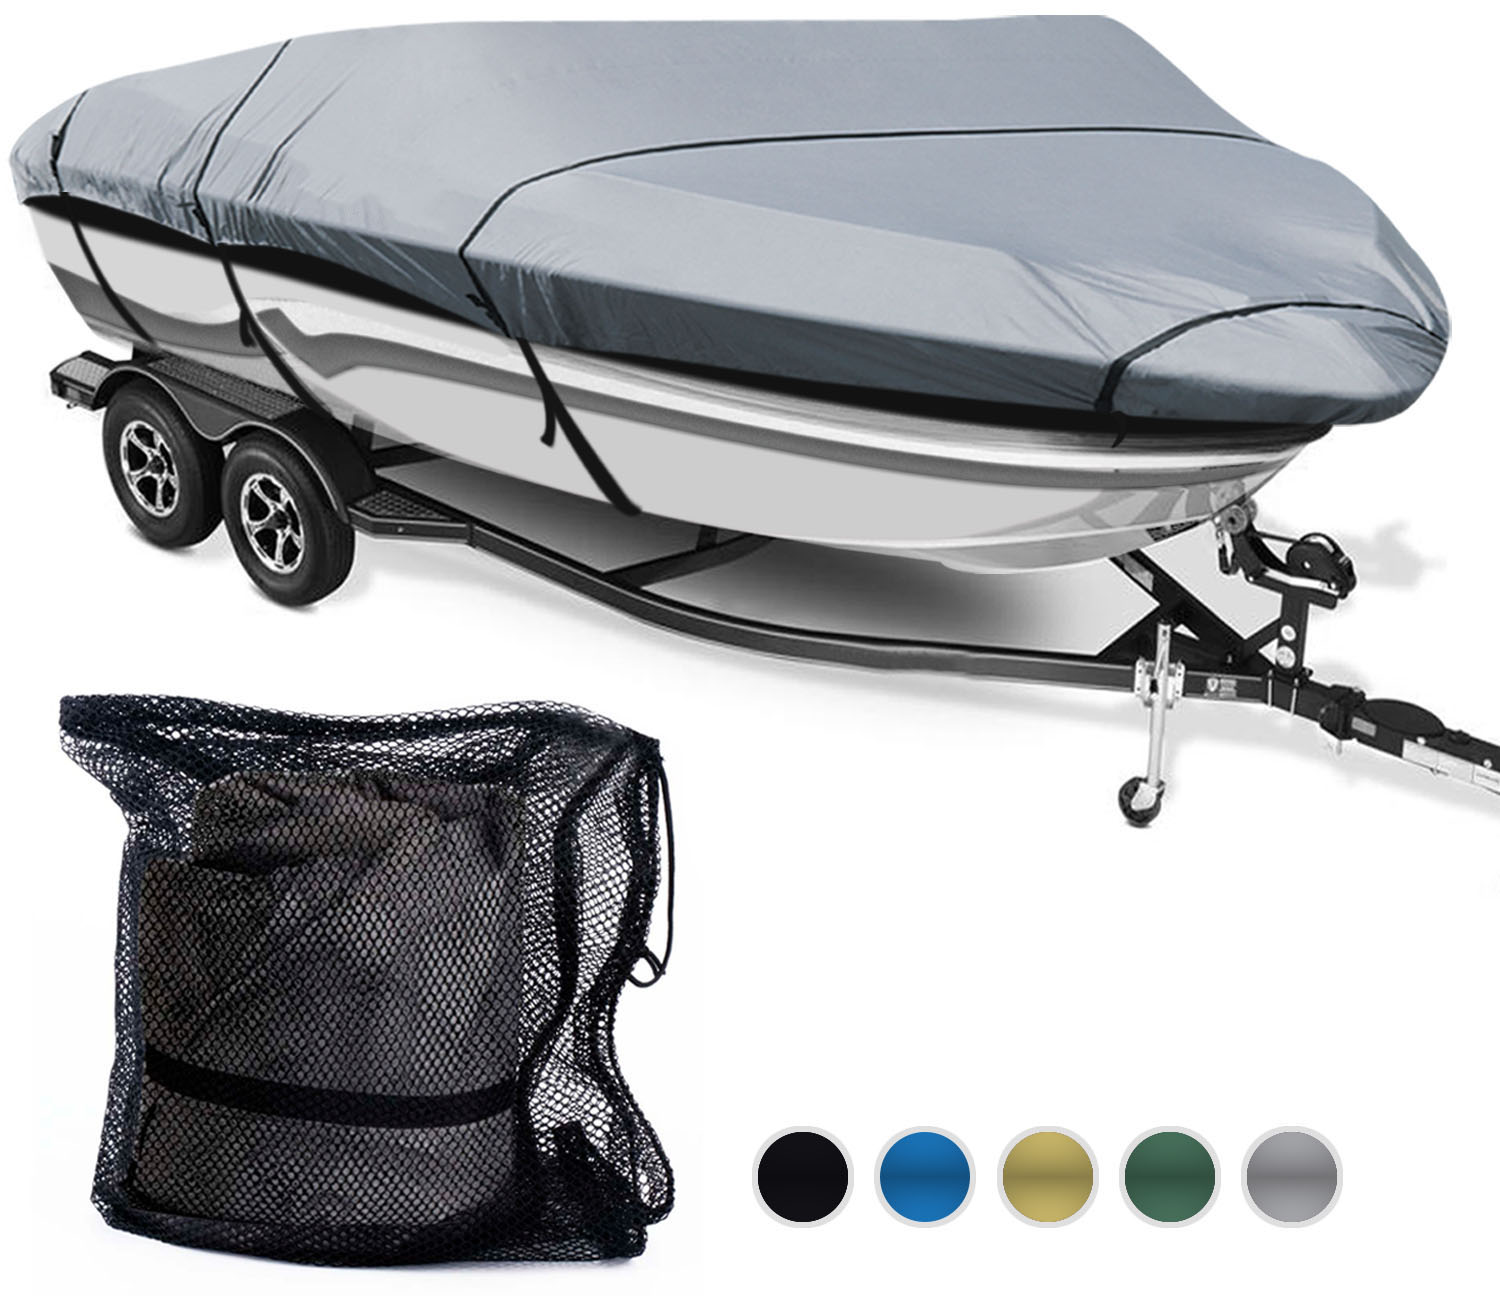 600D Waterproof Trailerable Boat Cover Fit V-Hull Tri-Hull Fishing Ski Pro-Style Bass Boats-1(1)